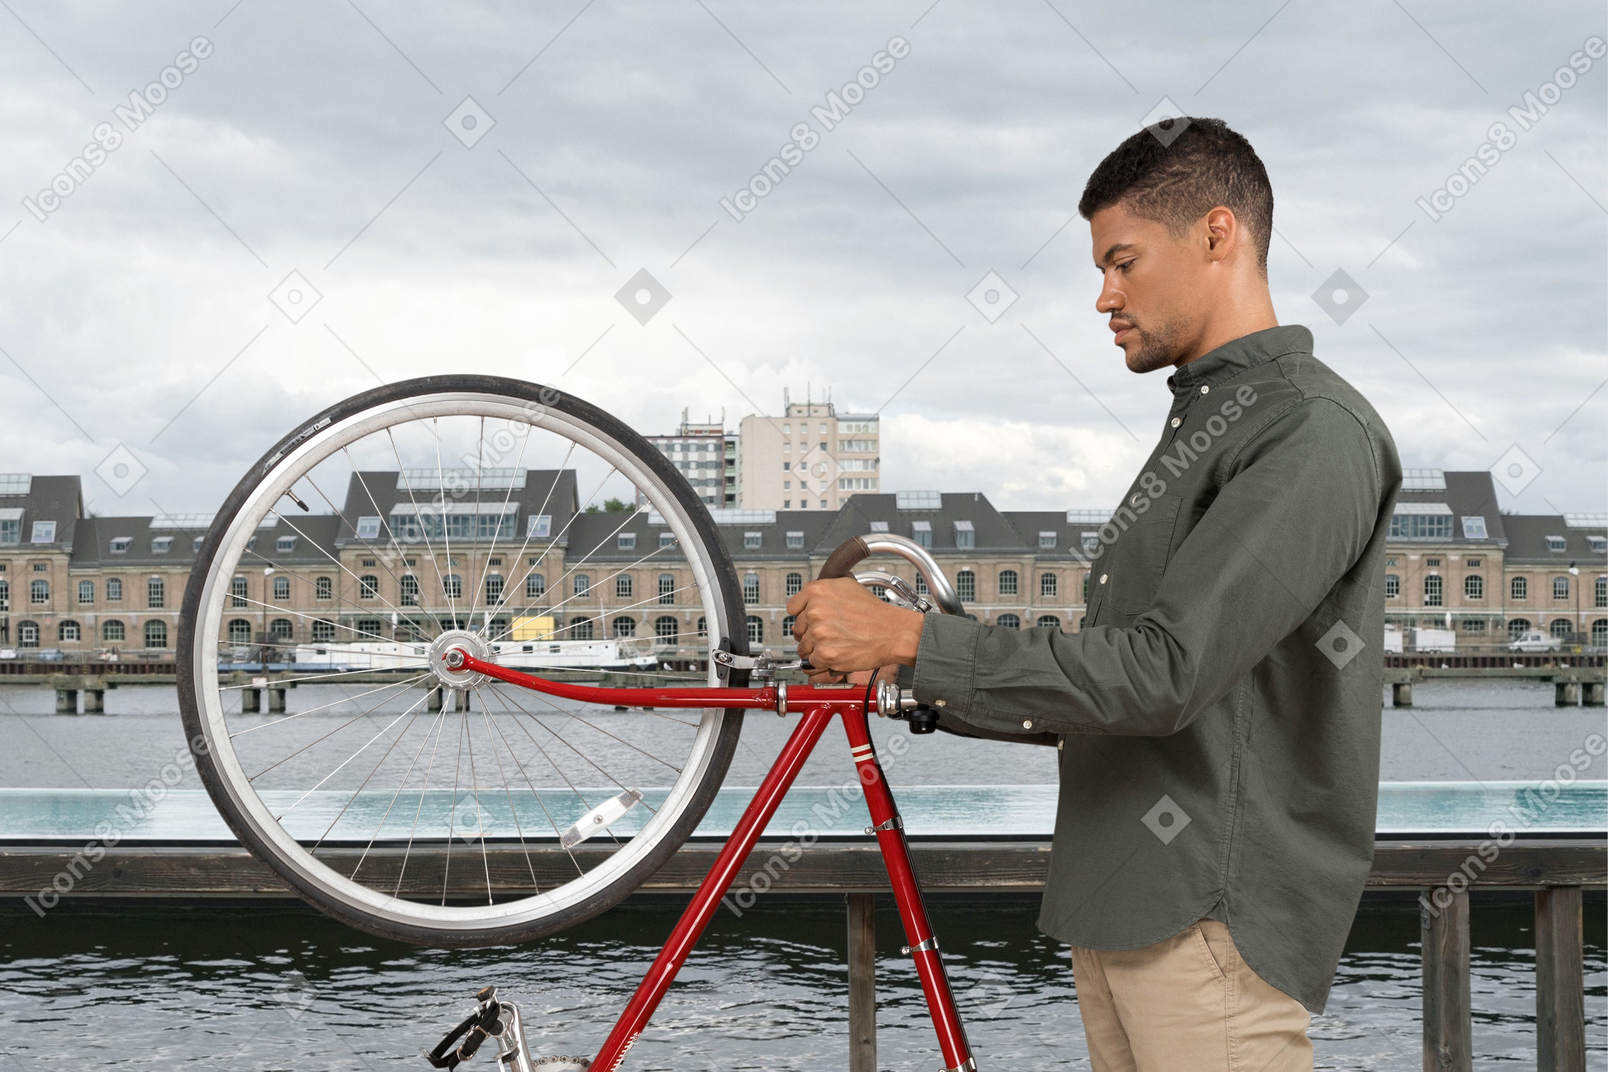 Man standing on a bridge with his bike